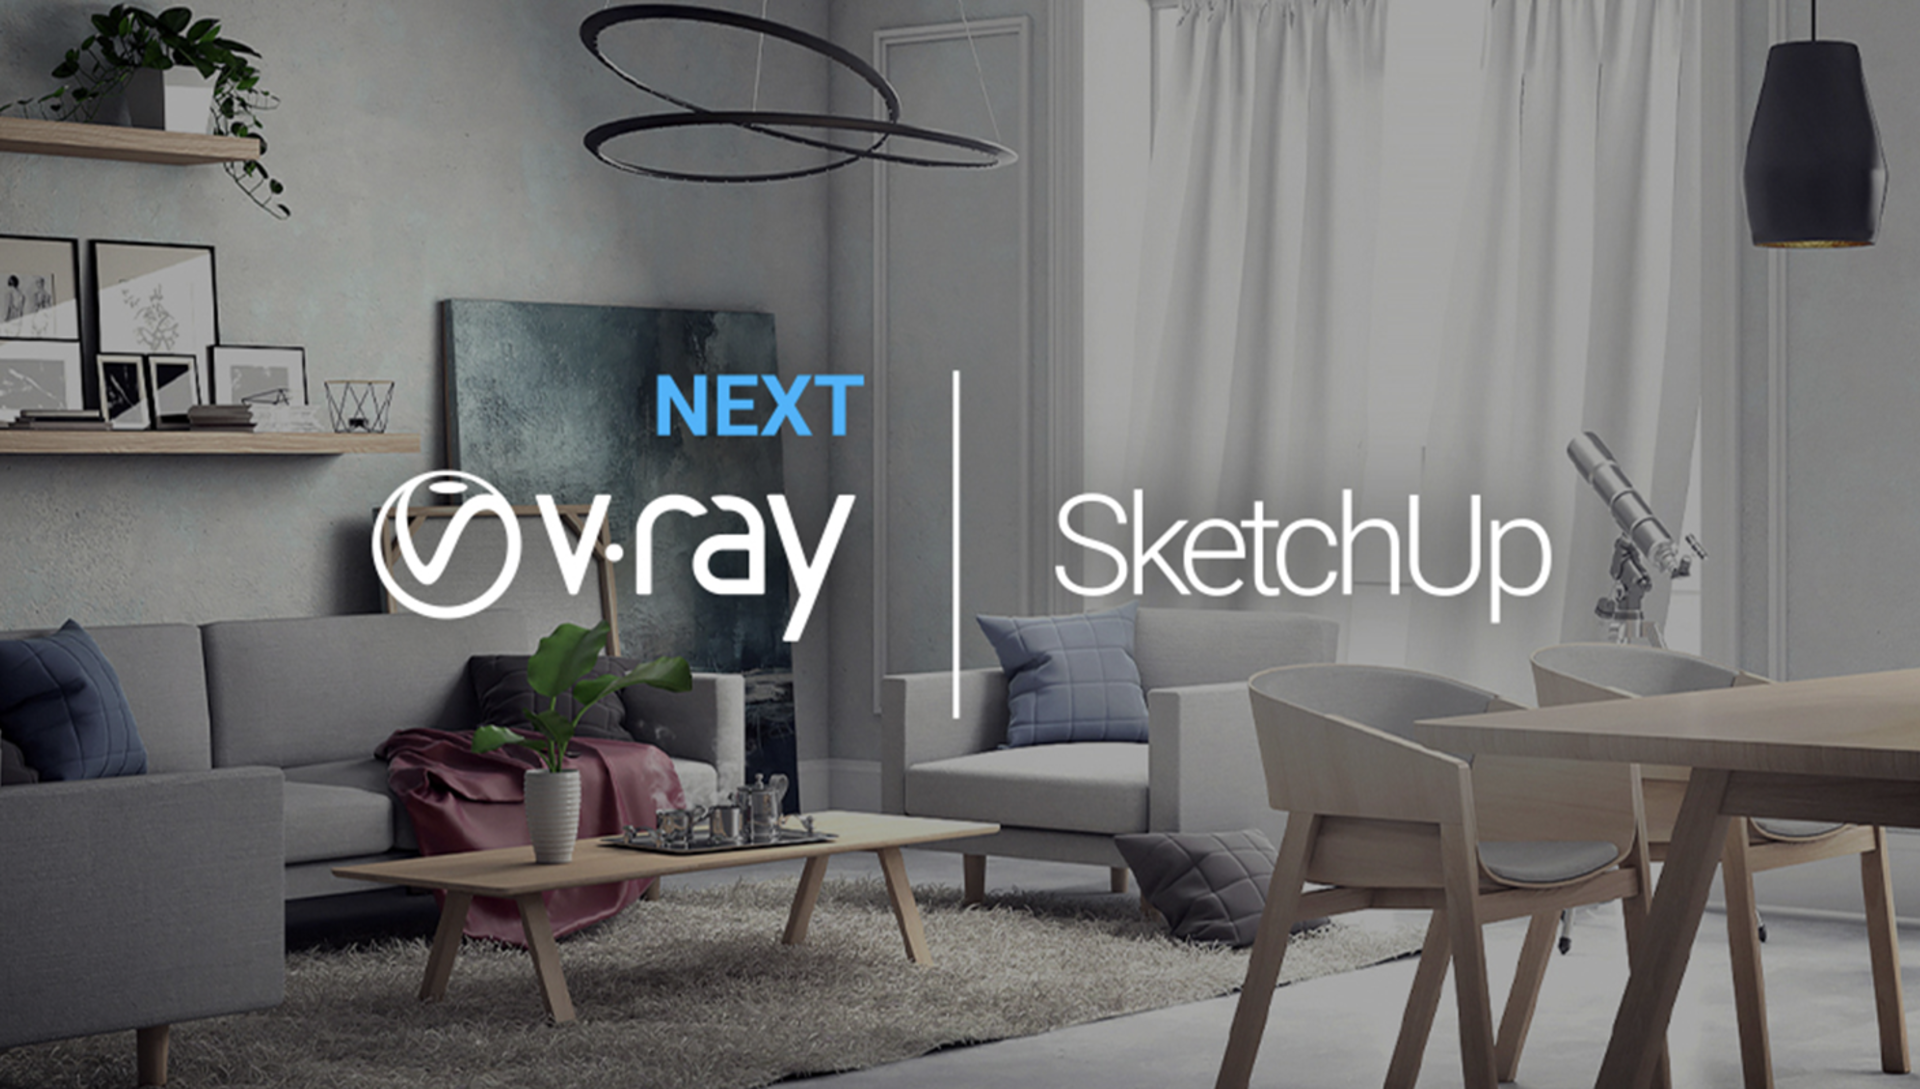 vray for sketchup 2017 free download with crack 64 bit